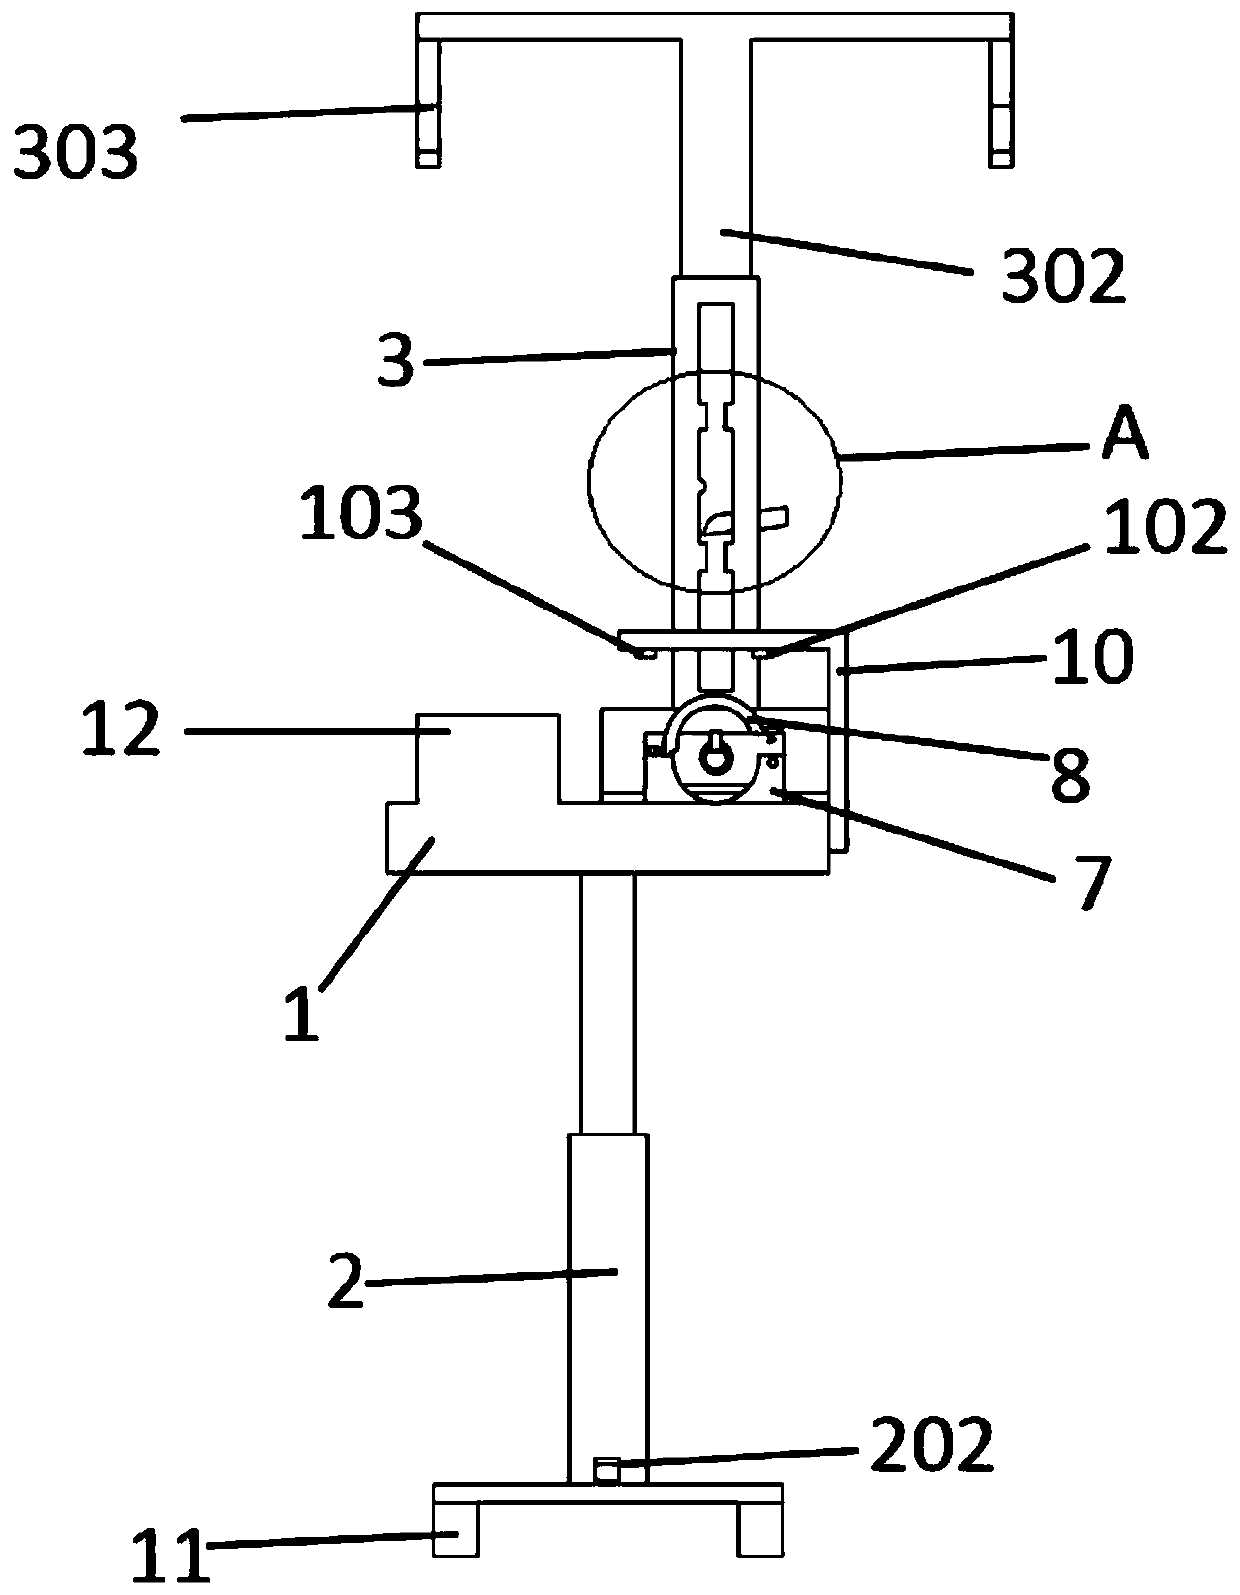 Intravenous infusion permeation prevention device for operating room nursing